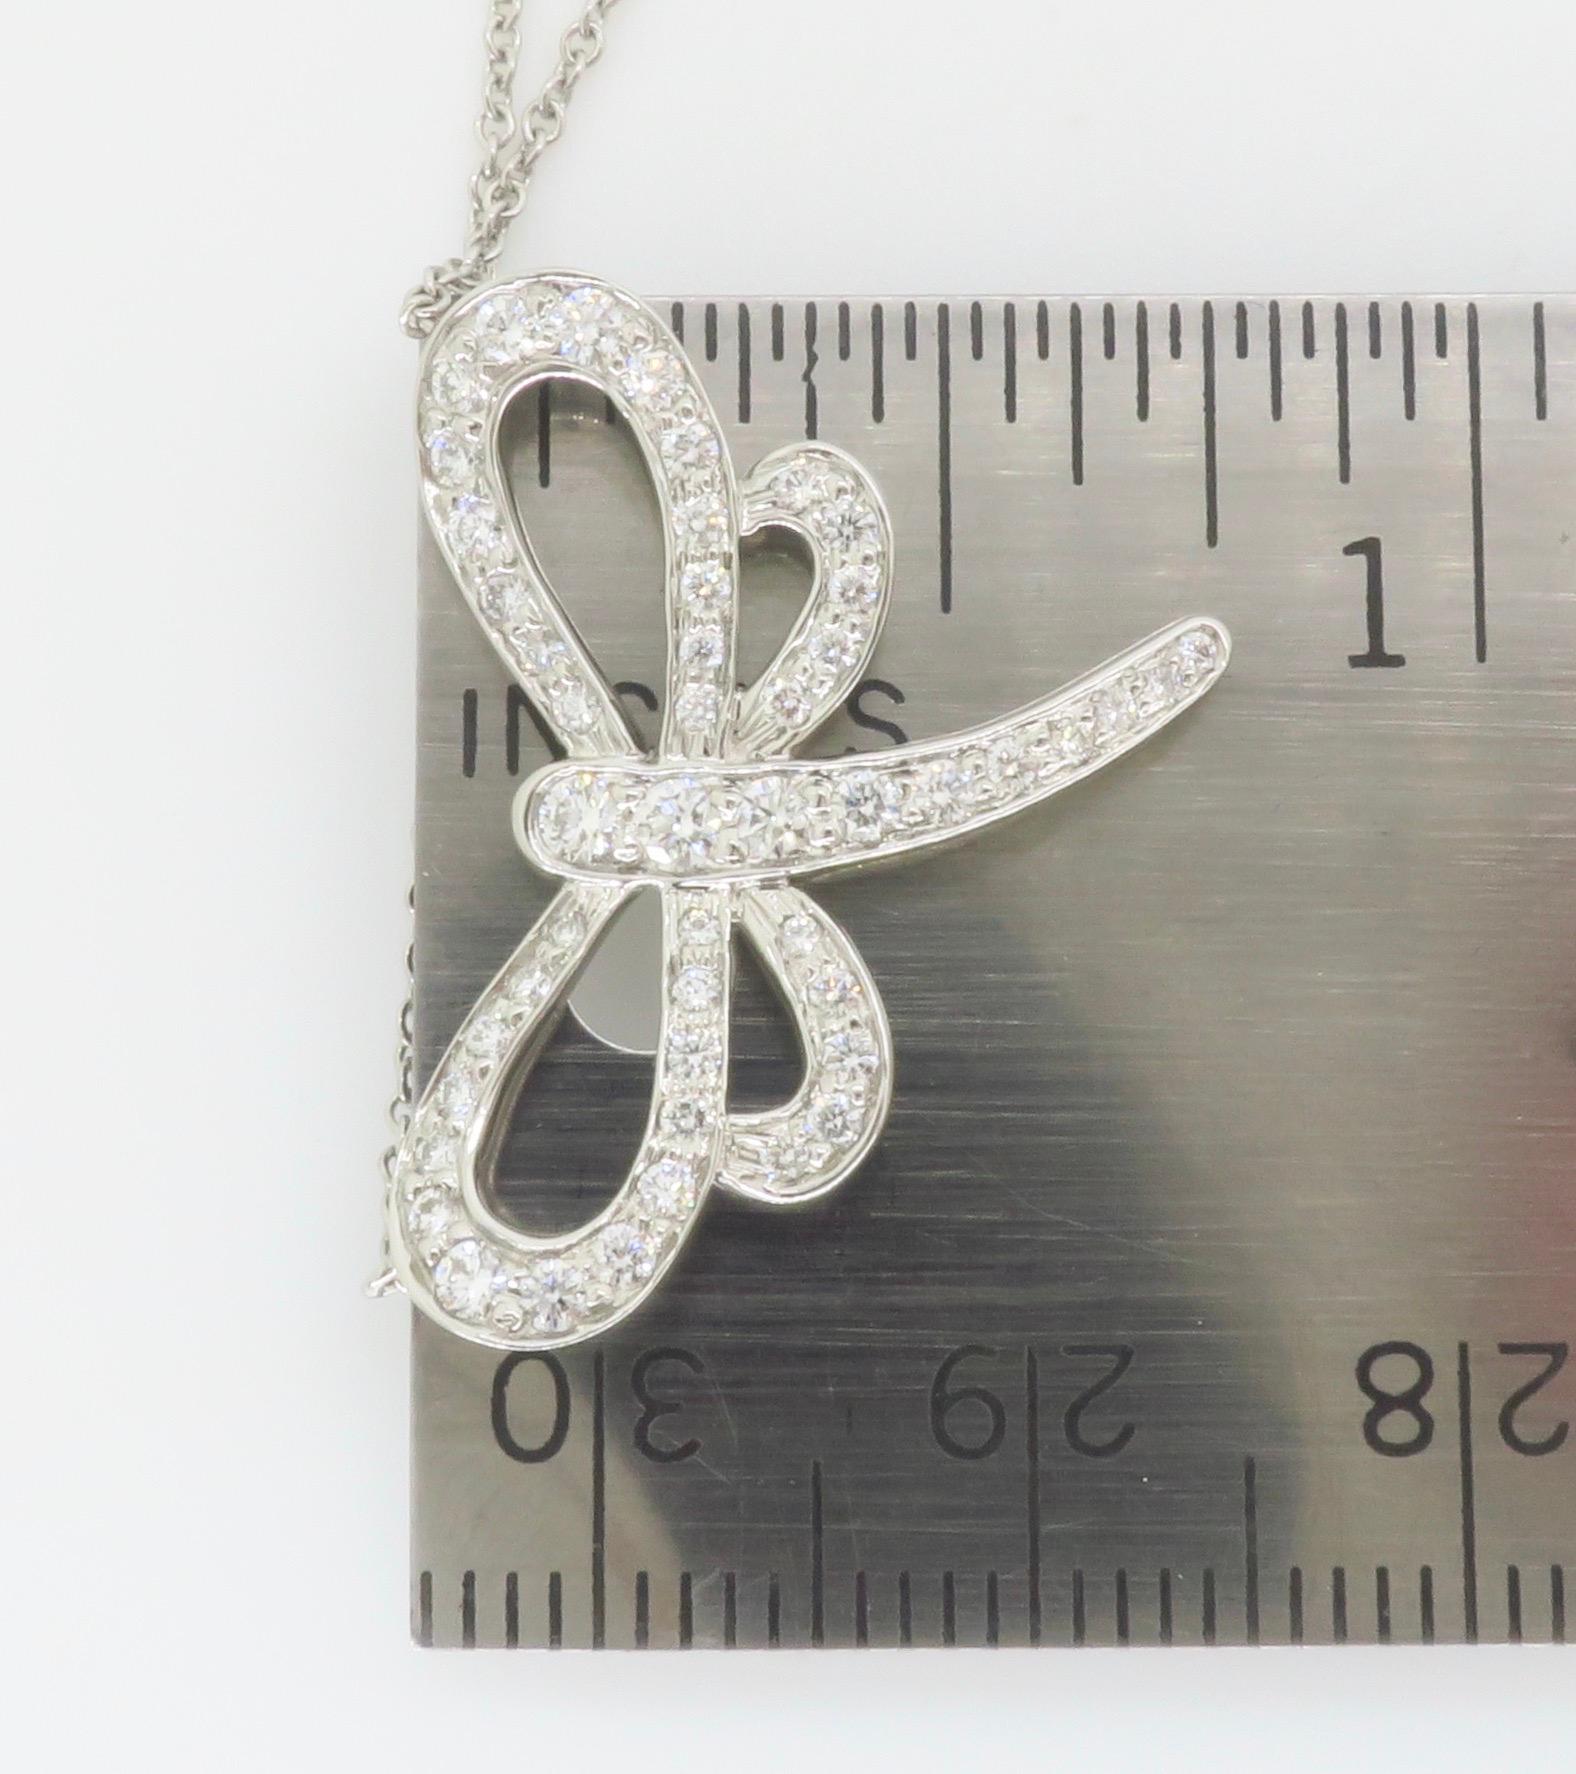 Rare Tiffany & Co. Diamond Dragonfly Necklace made in Platinum  5